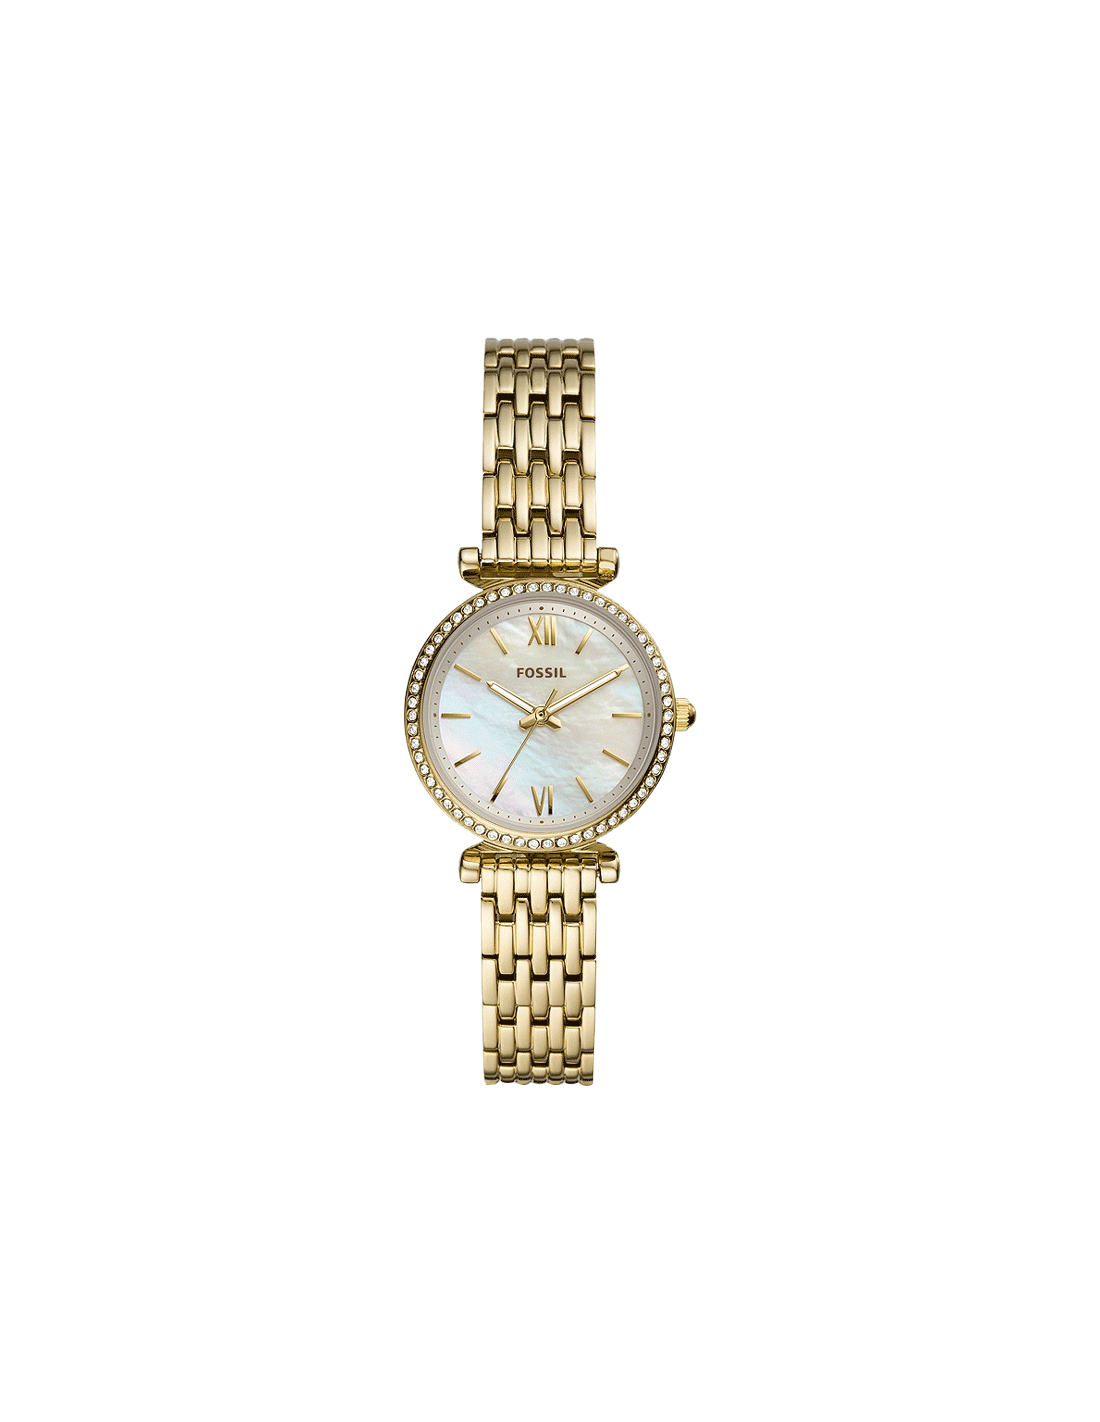 Fossil Neutra Ladies Watch in Gold | Pascoes